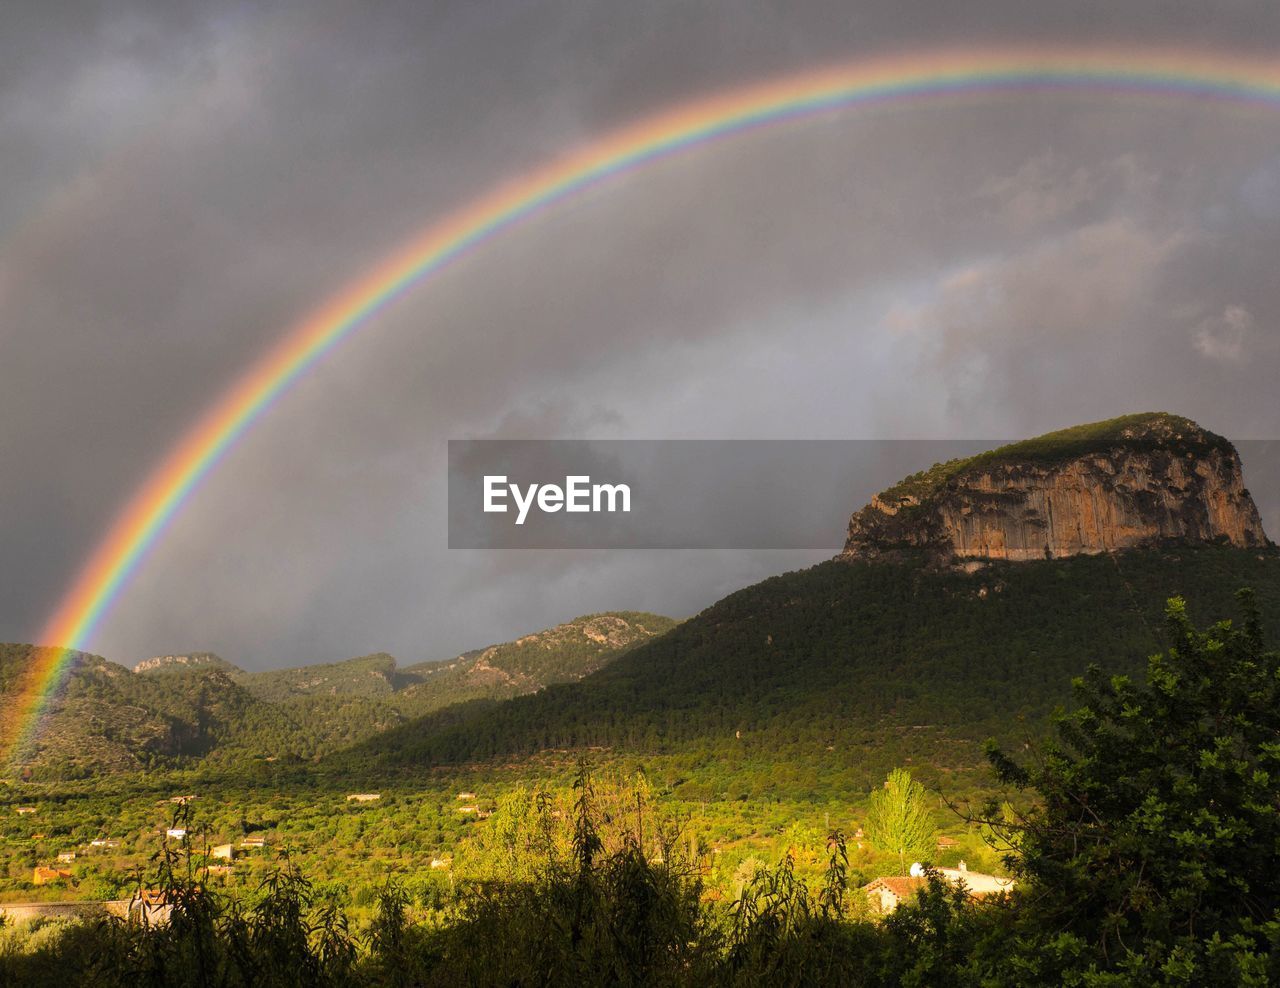 Scenic view of rainbow over mountain against dramatic sky